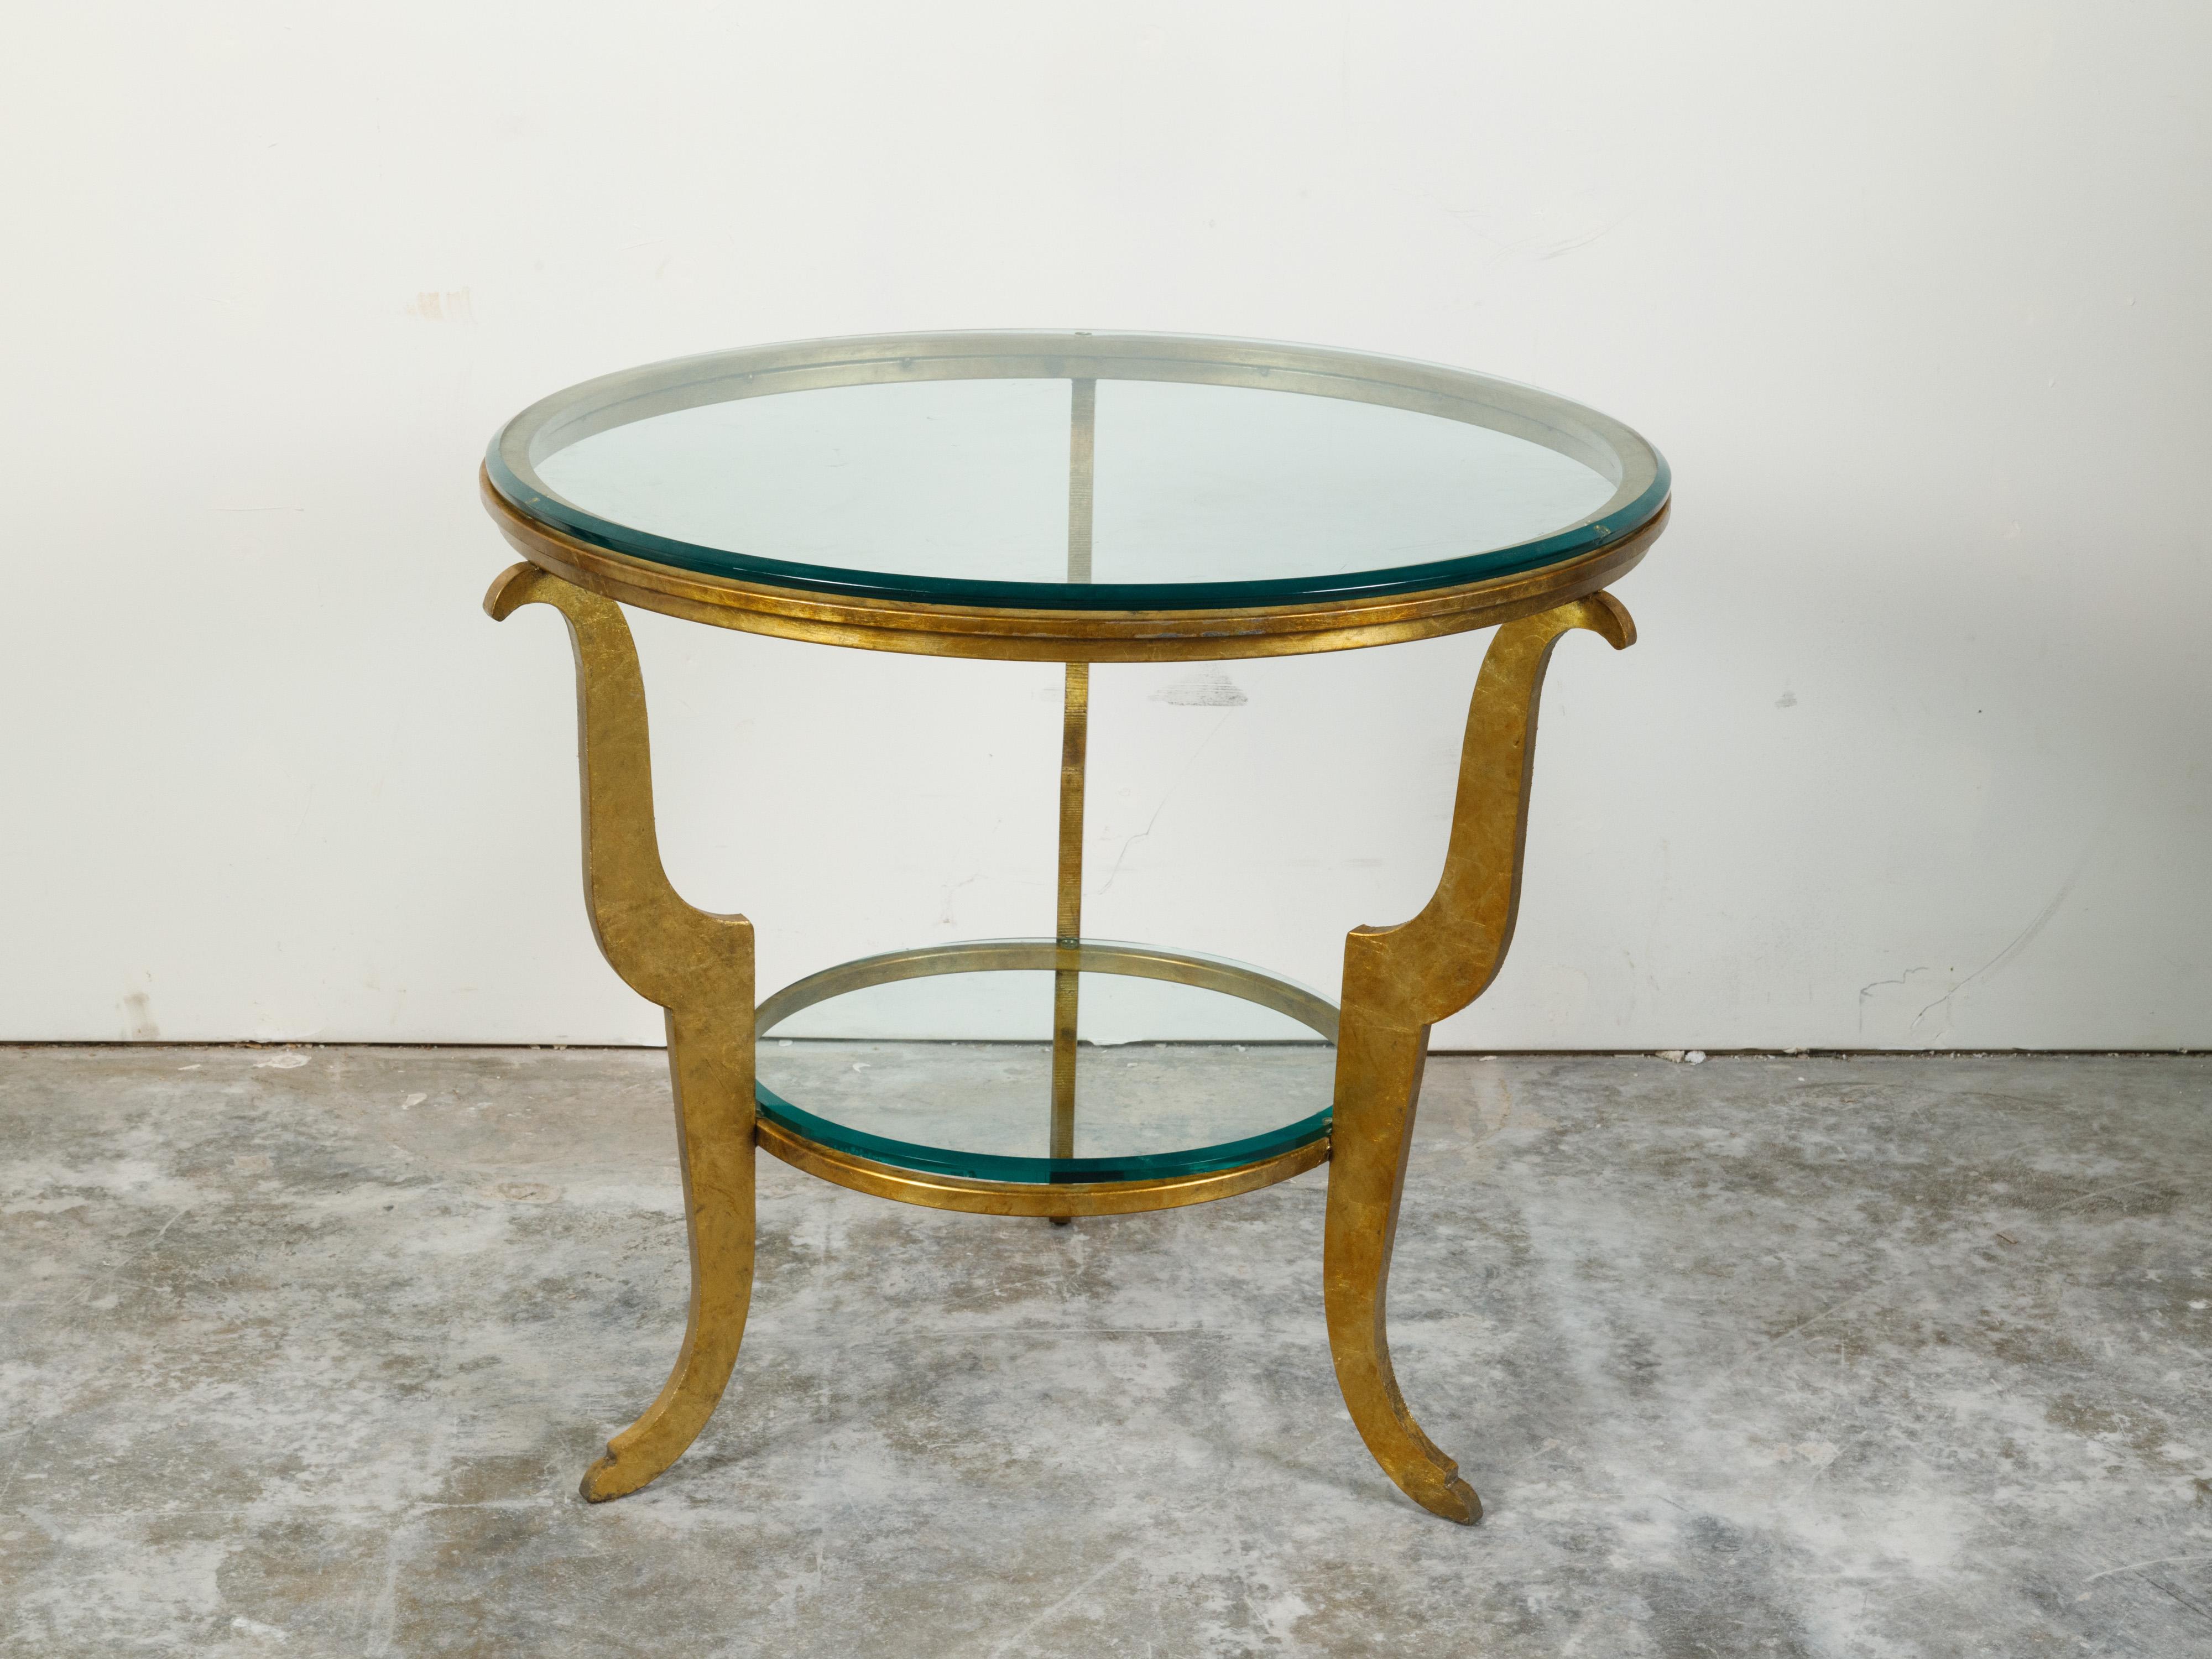 20th Century French Midcentury Gilt Iron Center Table with Glass Top and Scrolling Legs